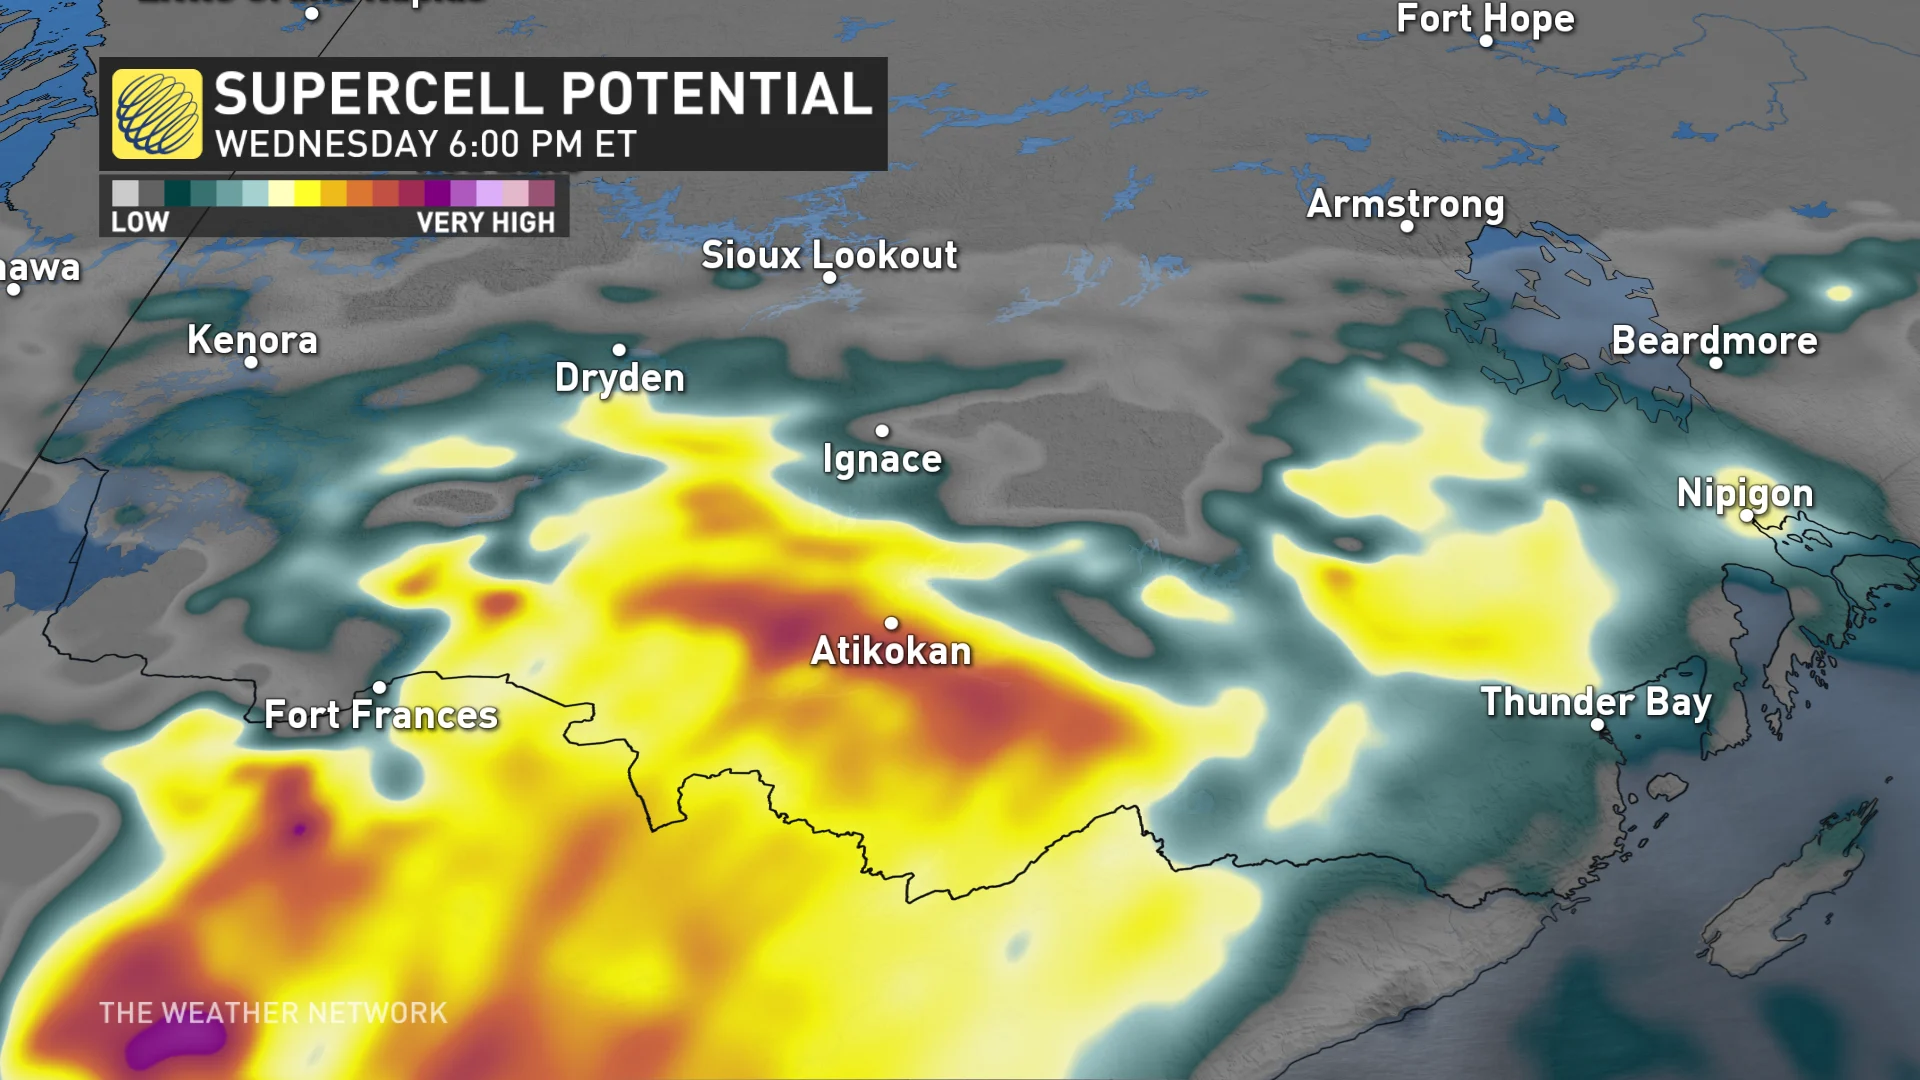 Baron- Wednesday supercell potential - June12